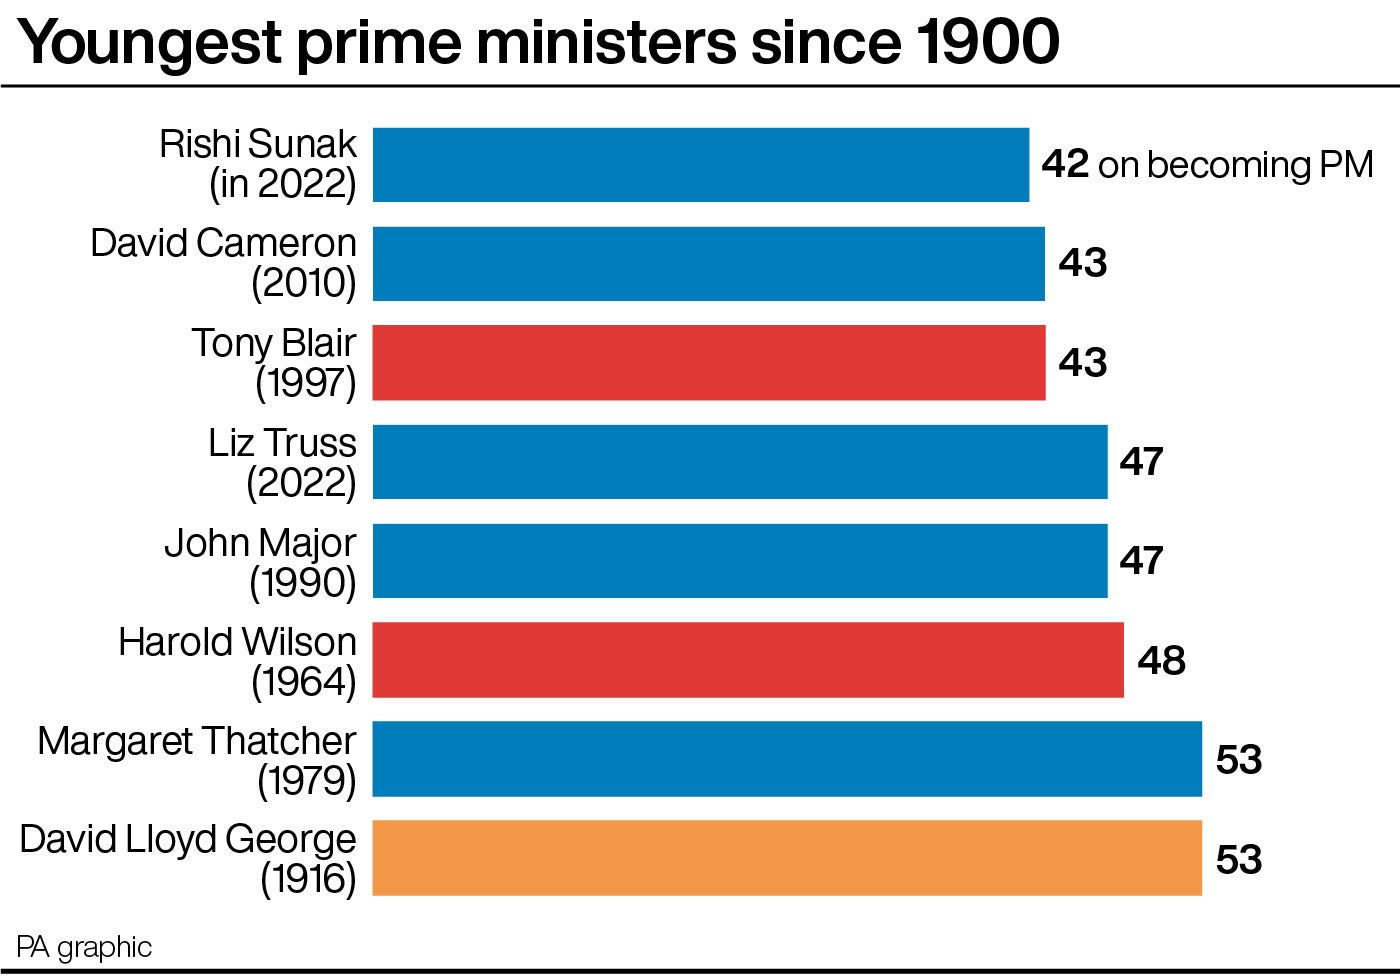 Rishi Sunak, aged 42, is the youngest British prime minister for more than a century